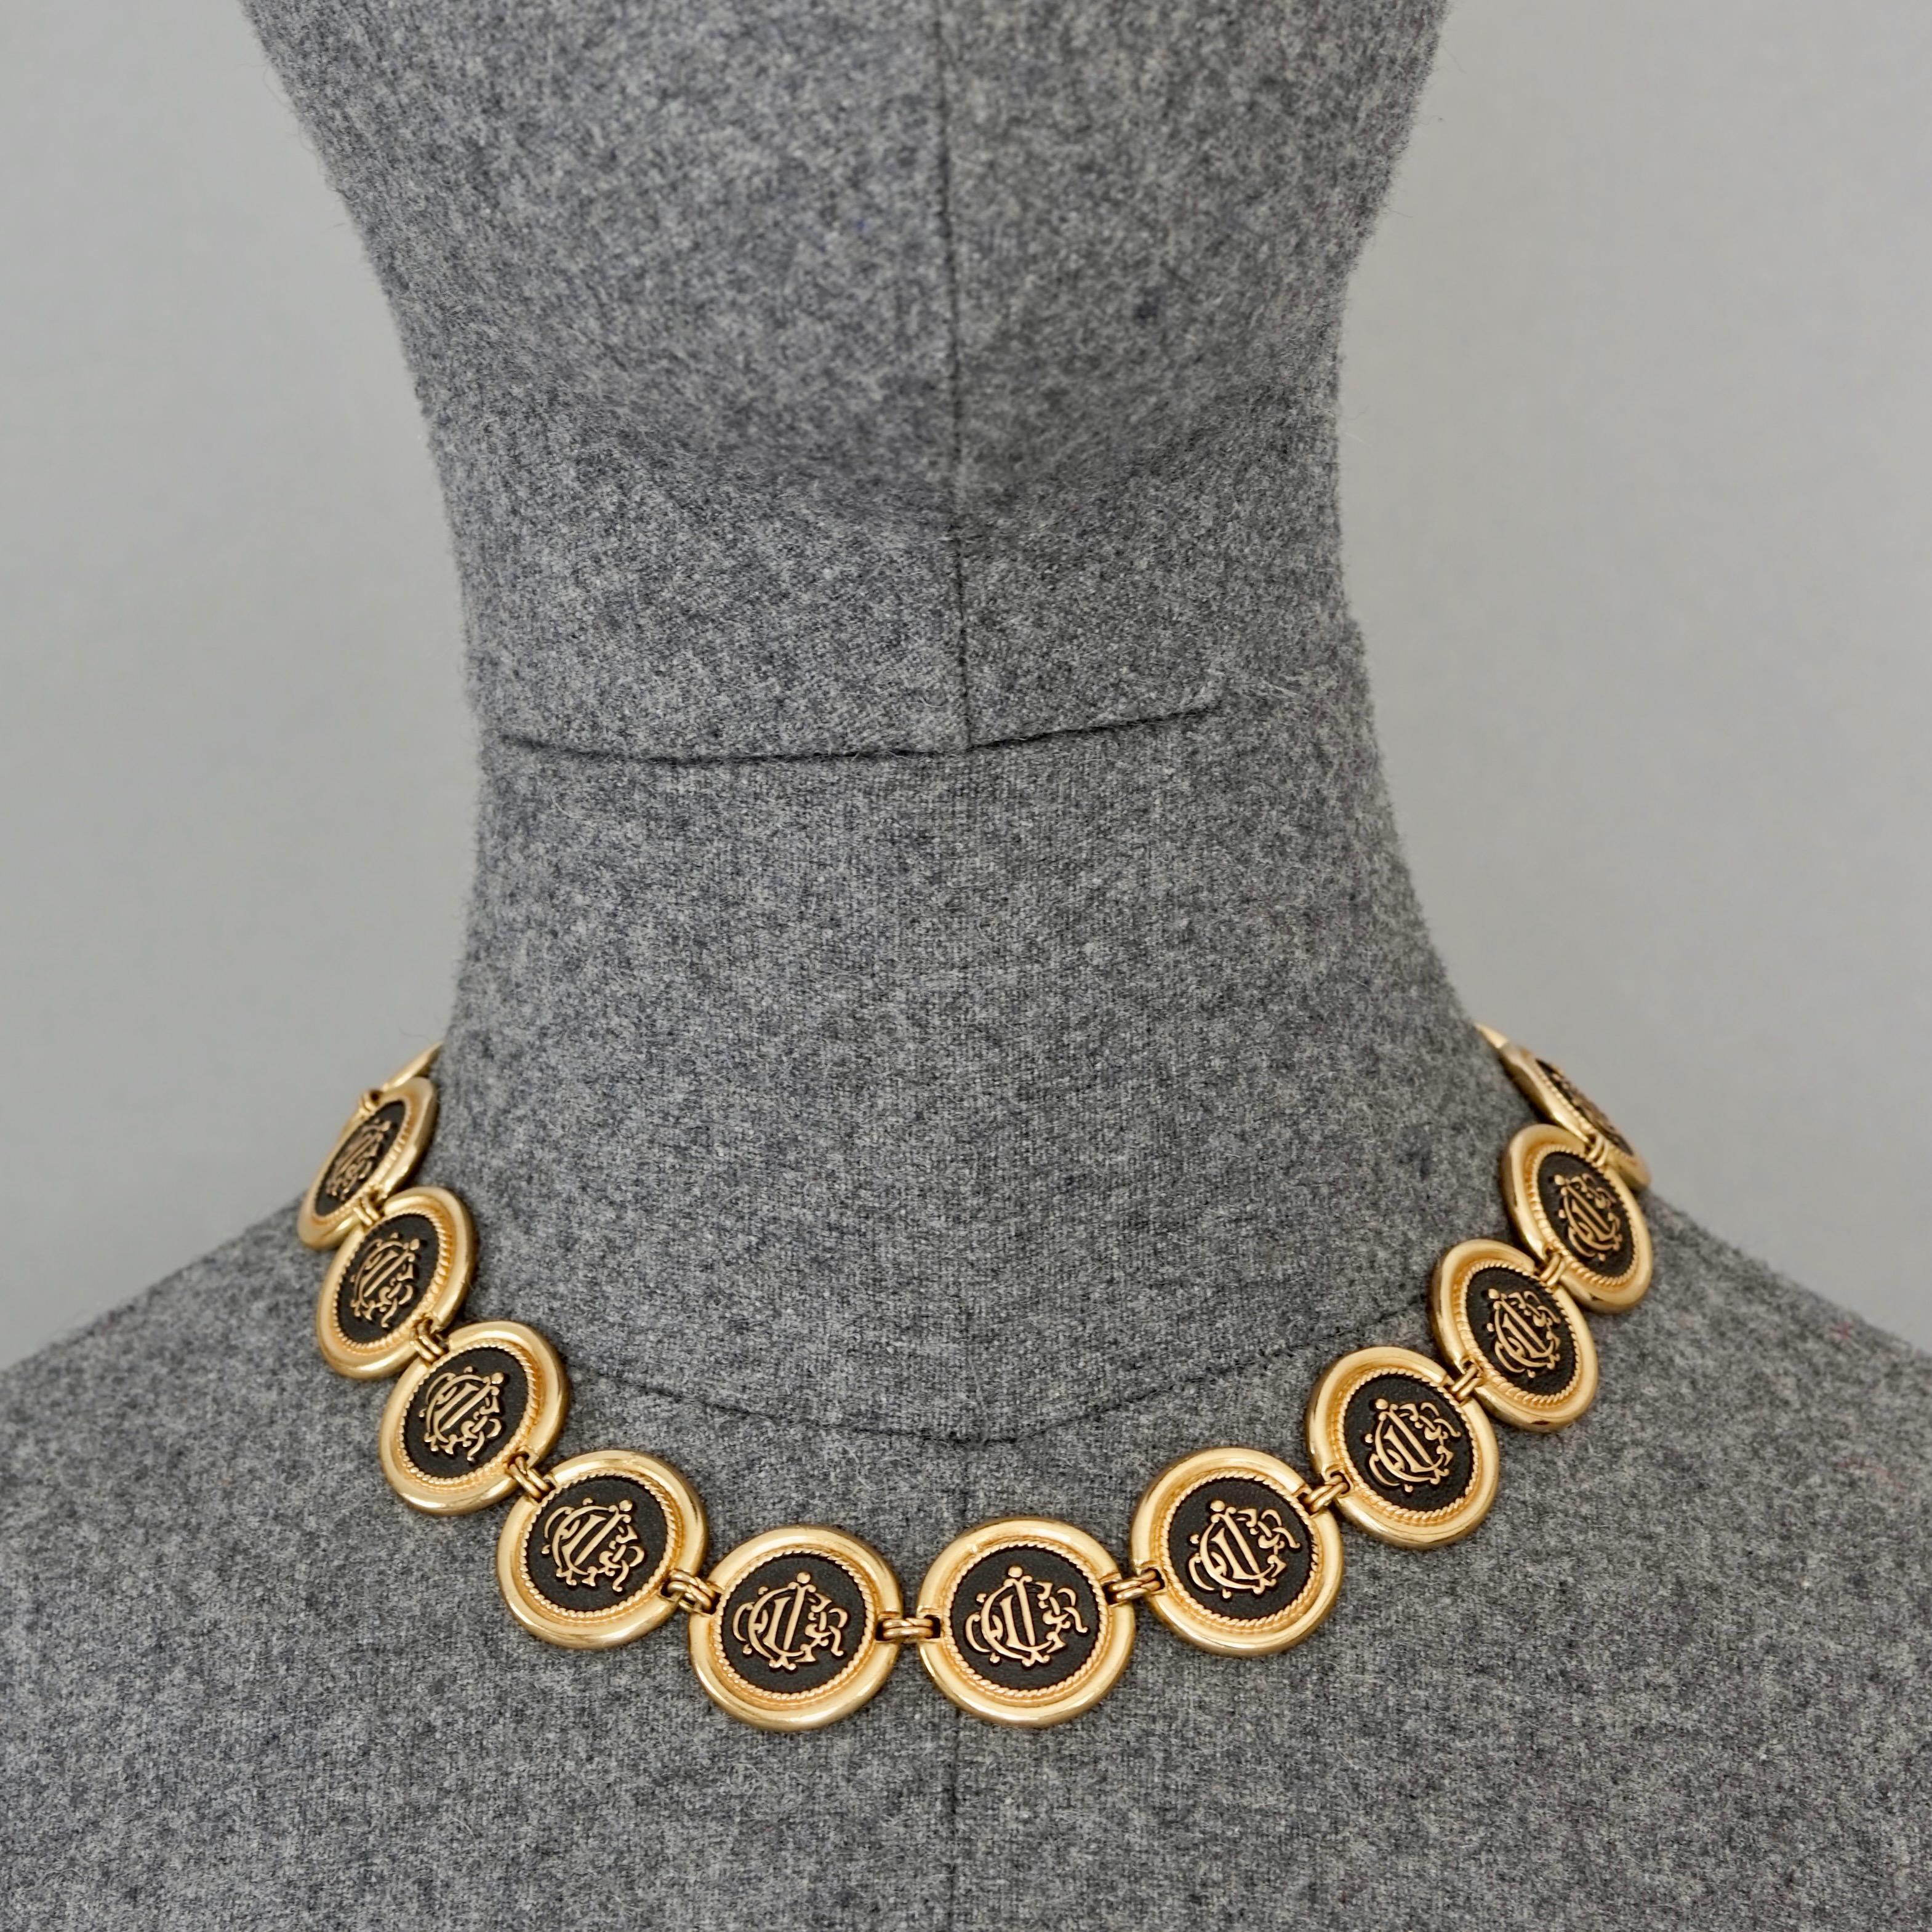 Vintage CHRISTIAN DIOR Logo Insignia Medallion Link Necklace

Measurements:
Height: 0.90 inch (2.3 cm) 
Wearable Length: 17.12 inches until 19.09 inches (43.5 until 48.5 cm) adjustable

Features:
- 100% Authentic CHRISTIAN DIOR.
- Medallion link